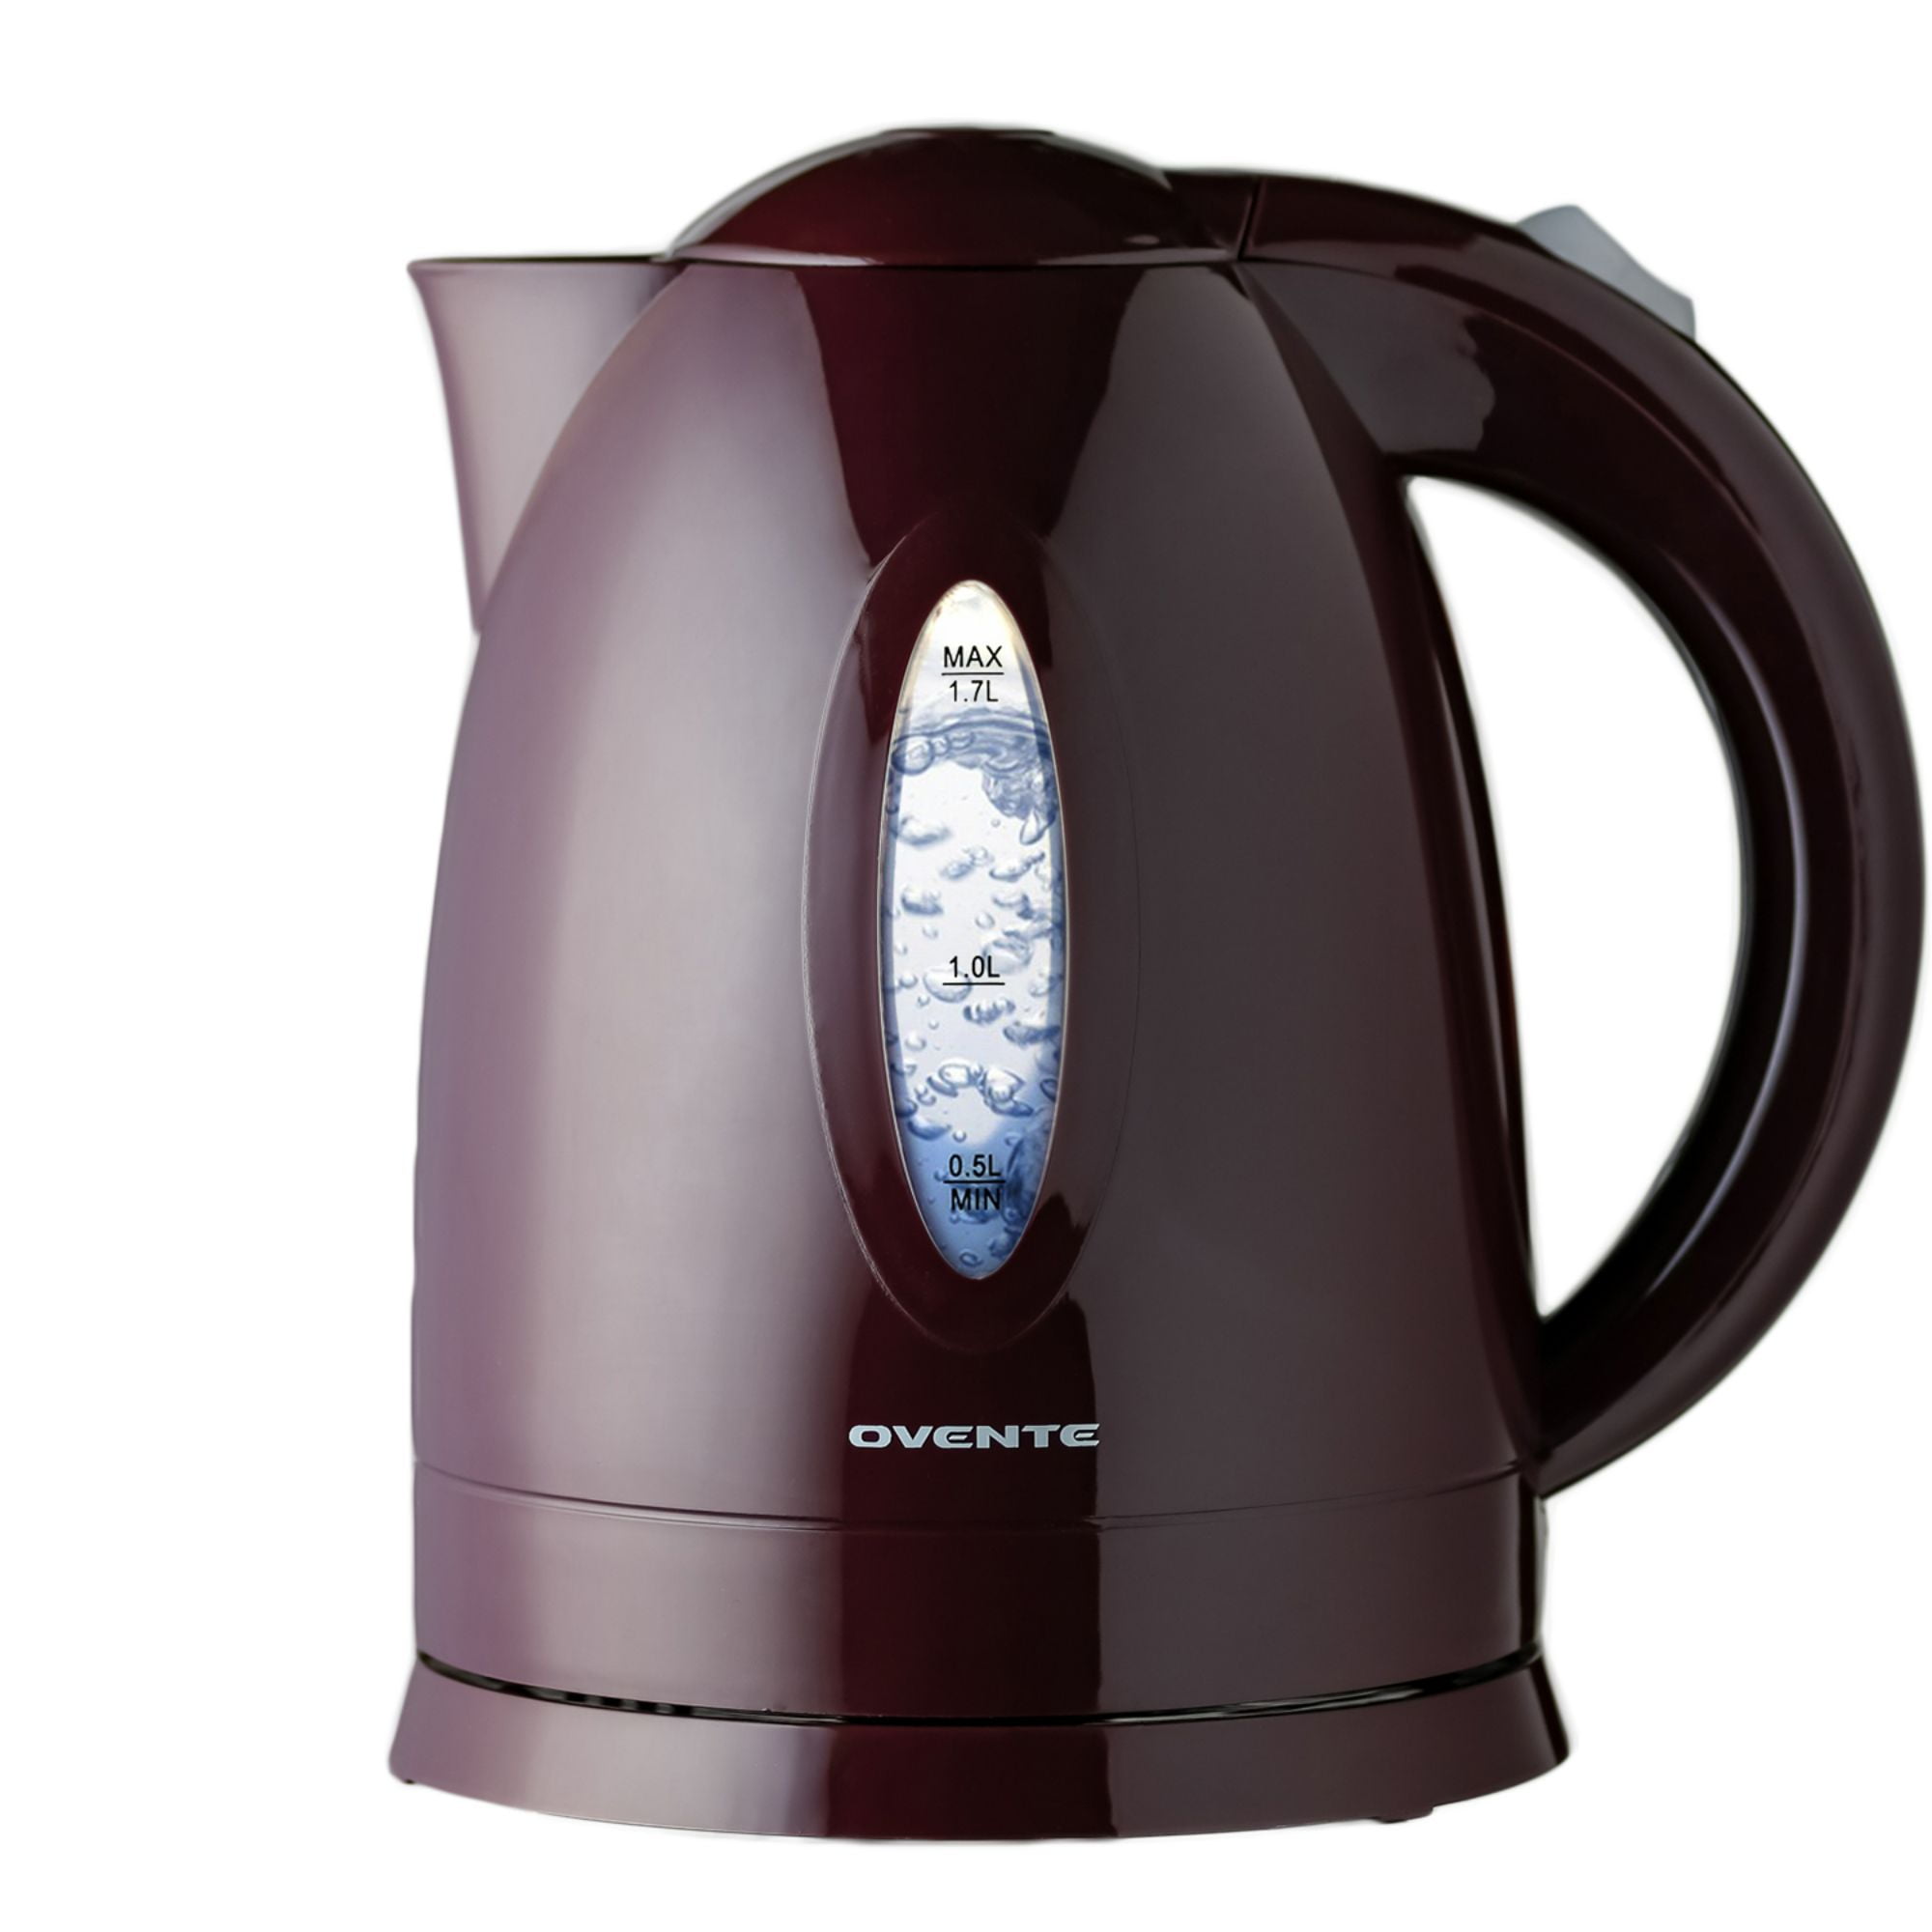  Offacy: Redefine Your Kitchen: Electric Kettle